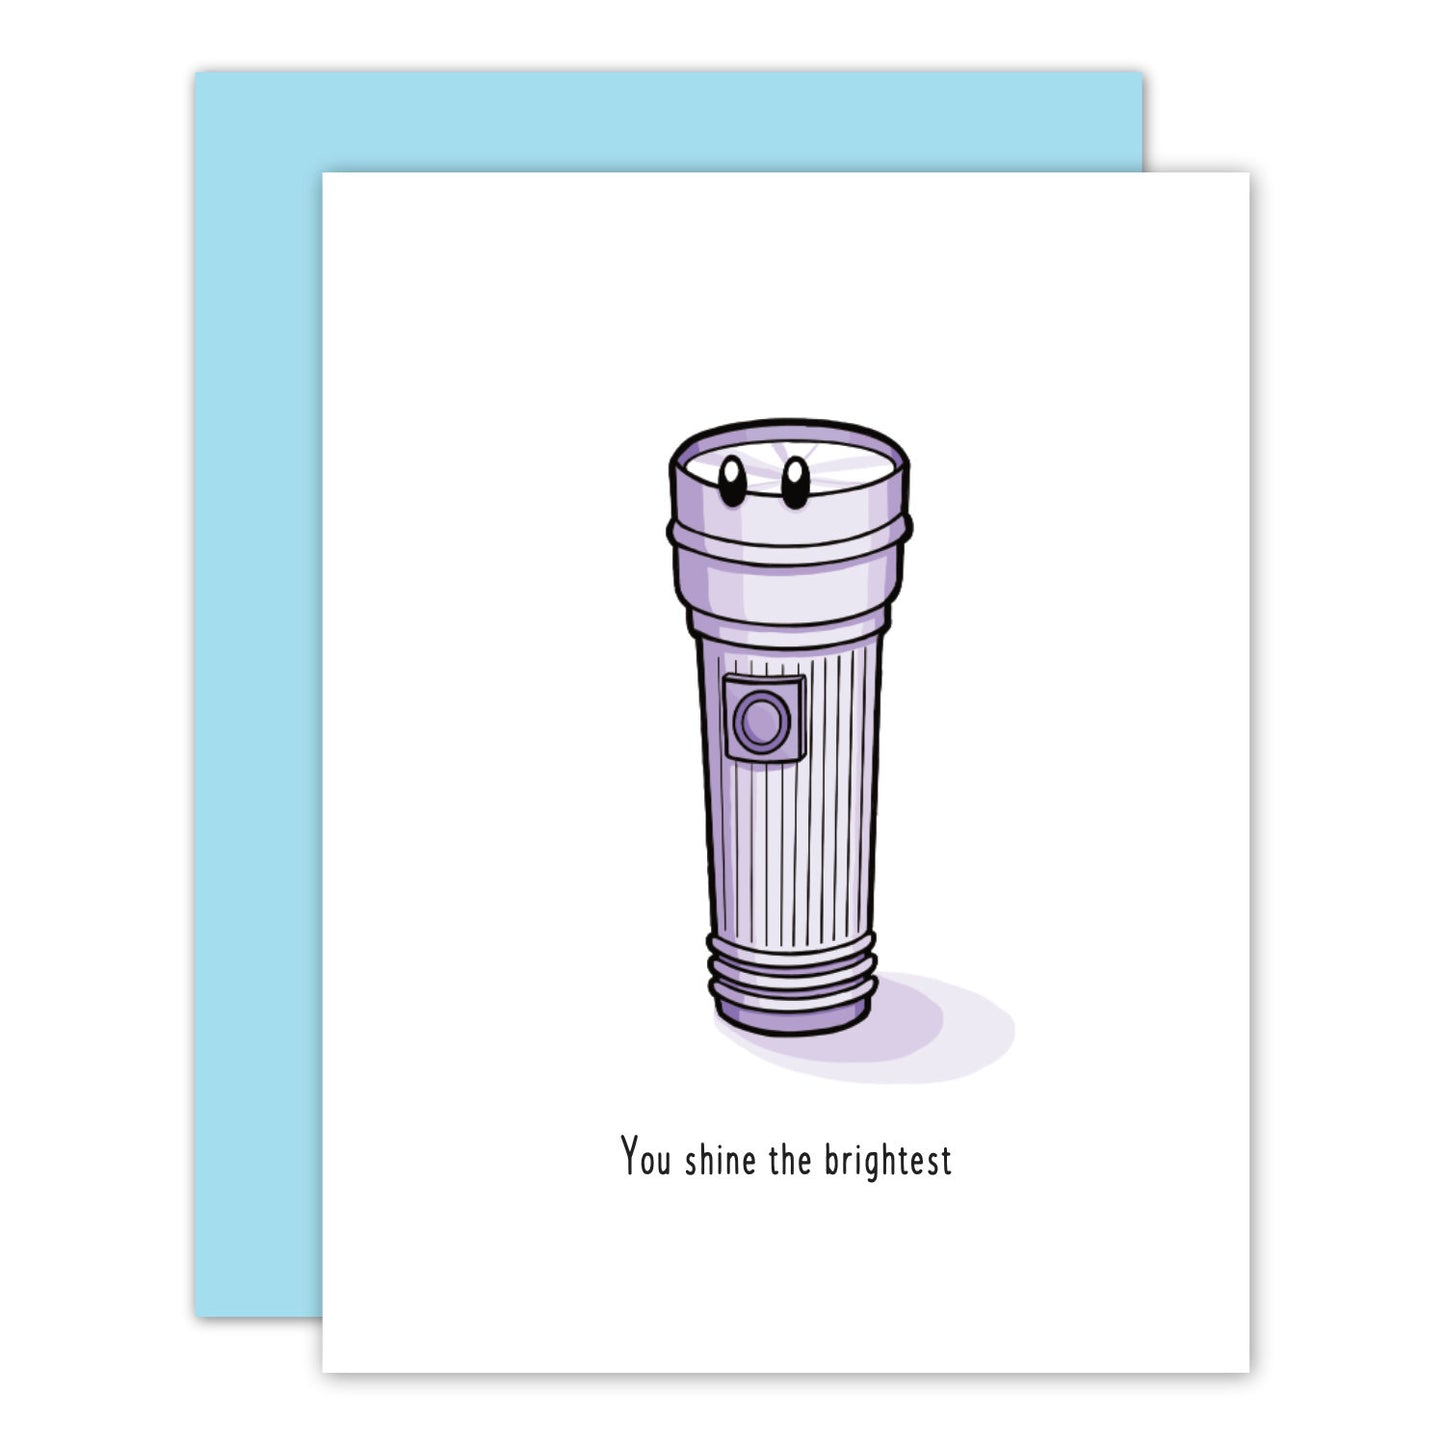 Theater of the Obsolete - Flashlight Love/Friendship Card